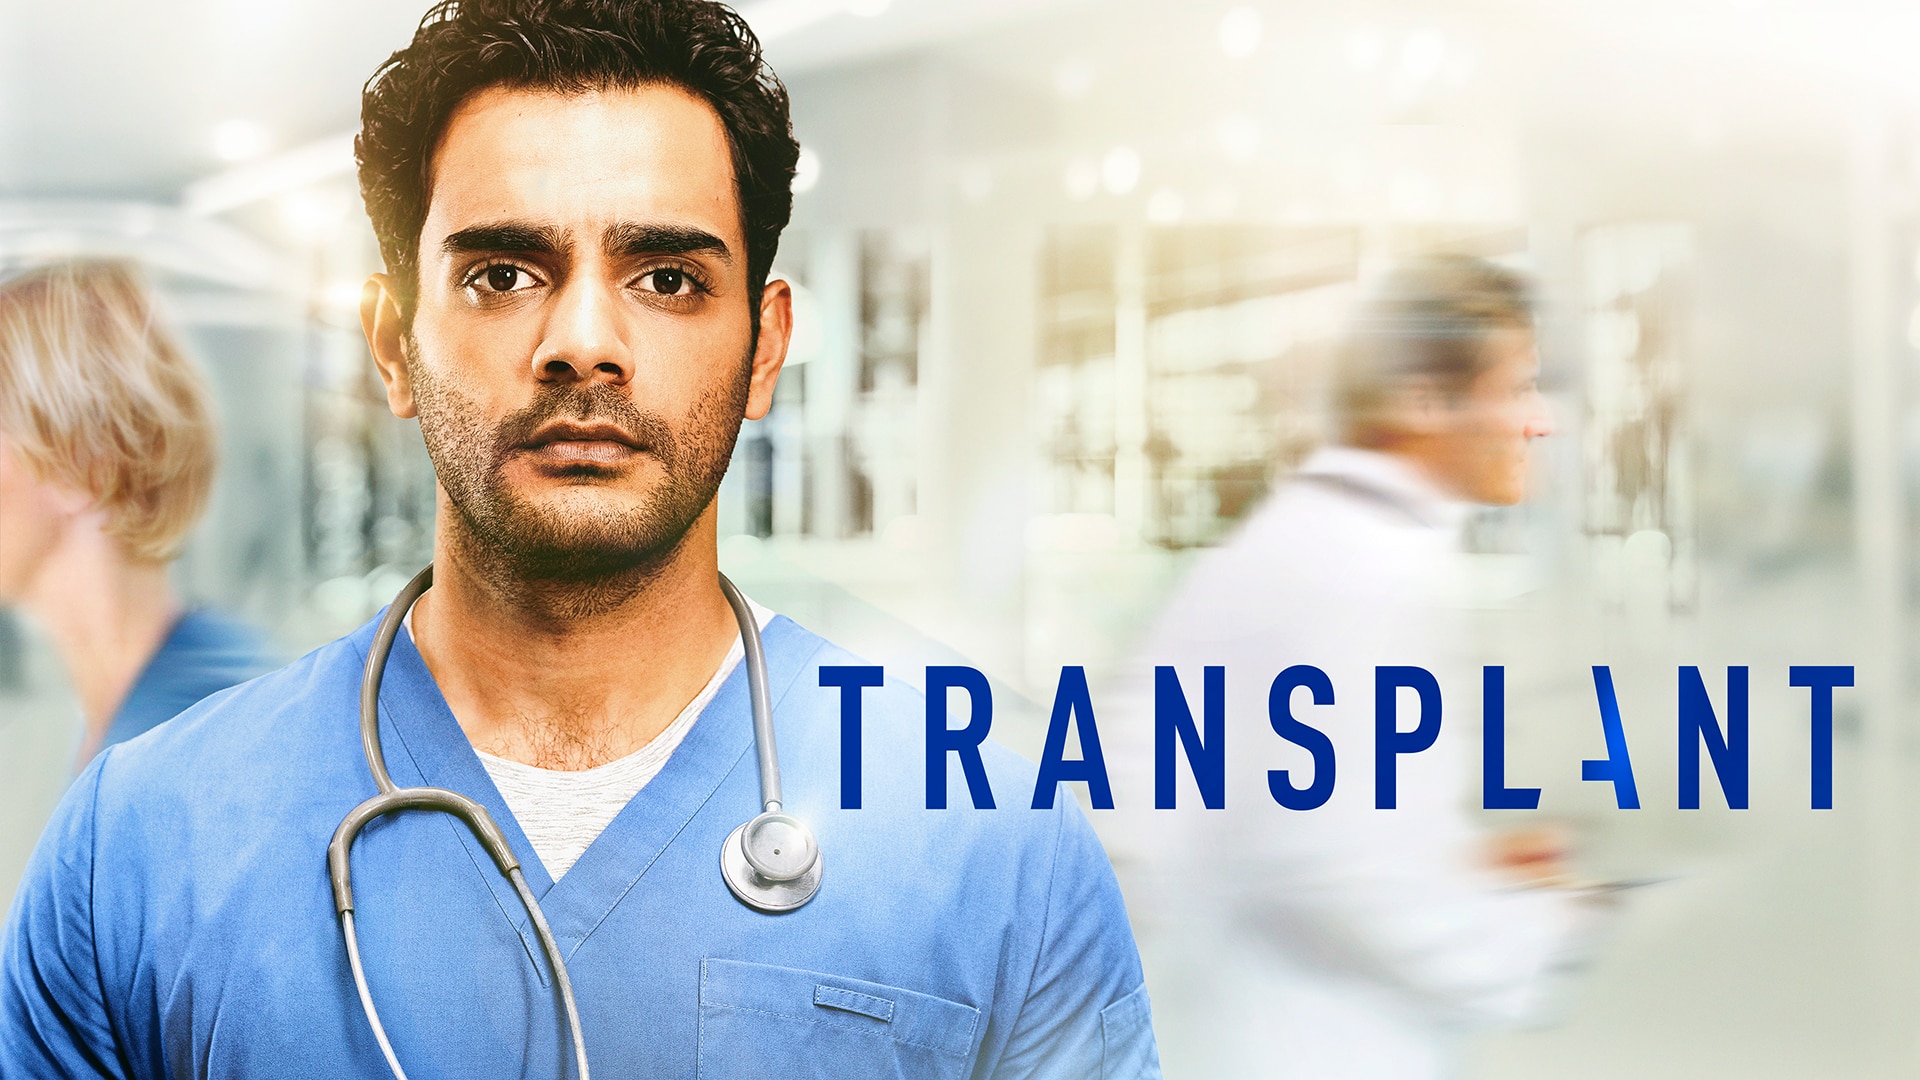 Watch Transplant Current Preview: TRANSPLANT | Official ...